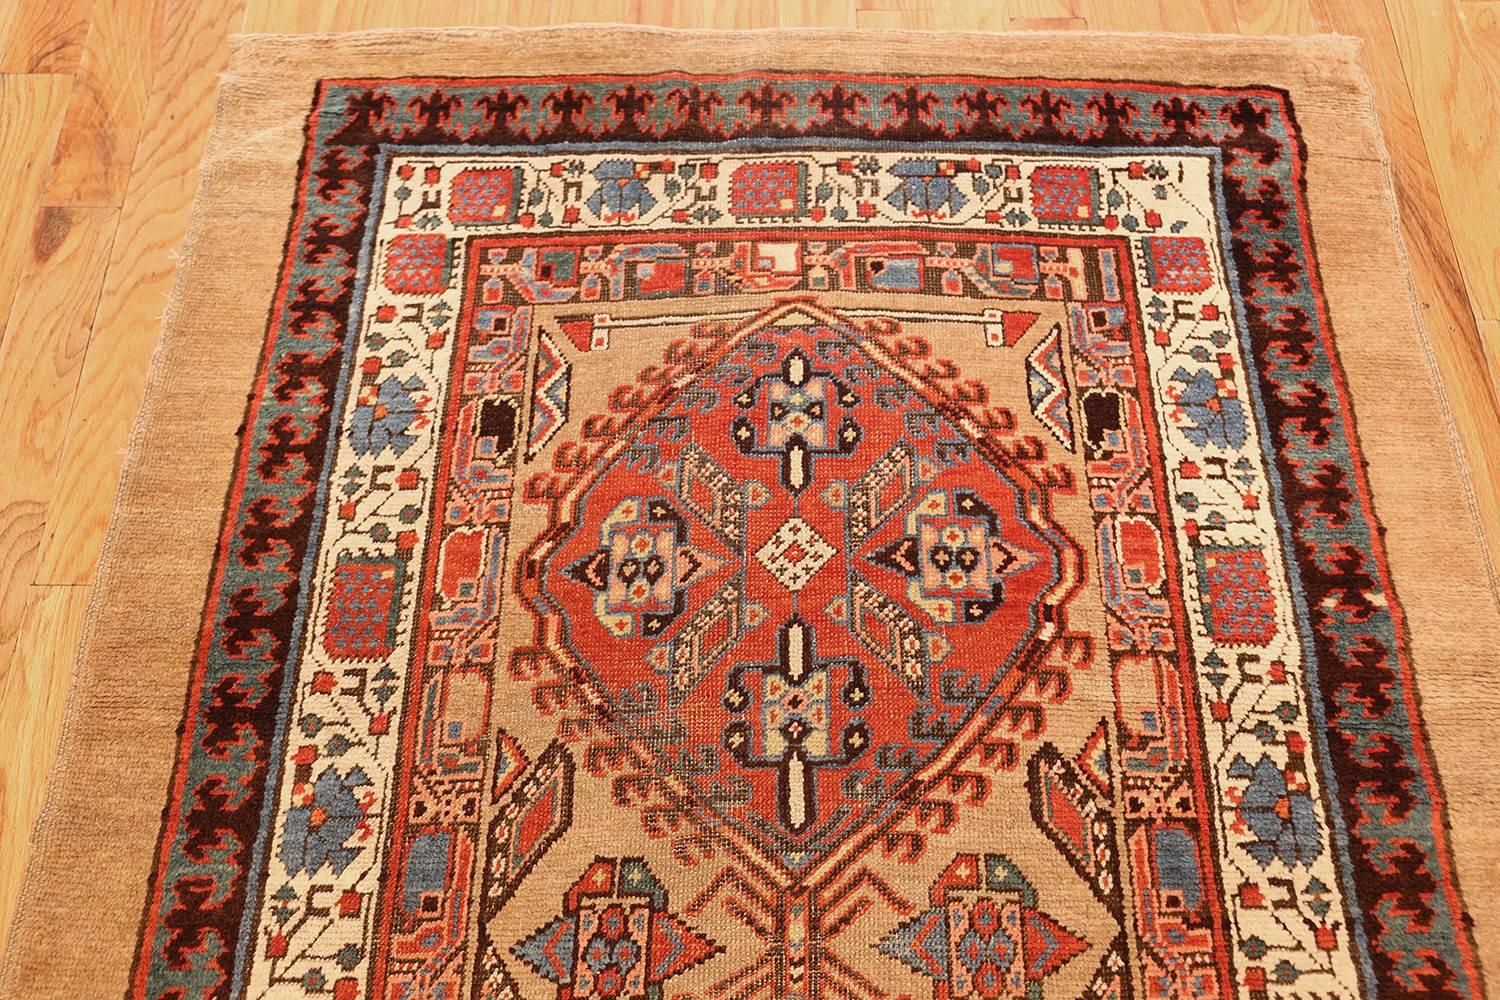 20th Century Antique Persian Serab Runner Rug. Size: 4 ft x 12 ft 10 in (1.22 m x 3.91 m)